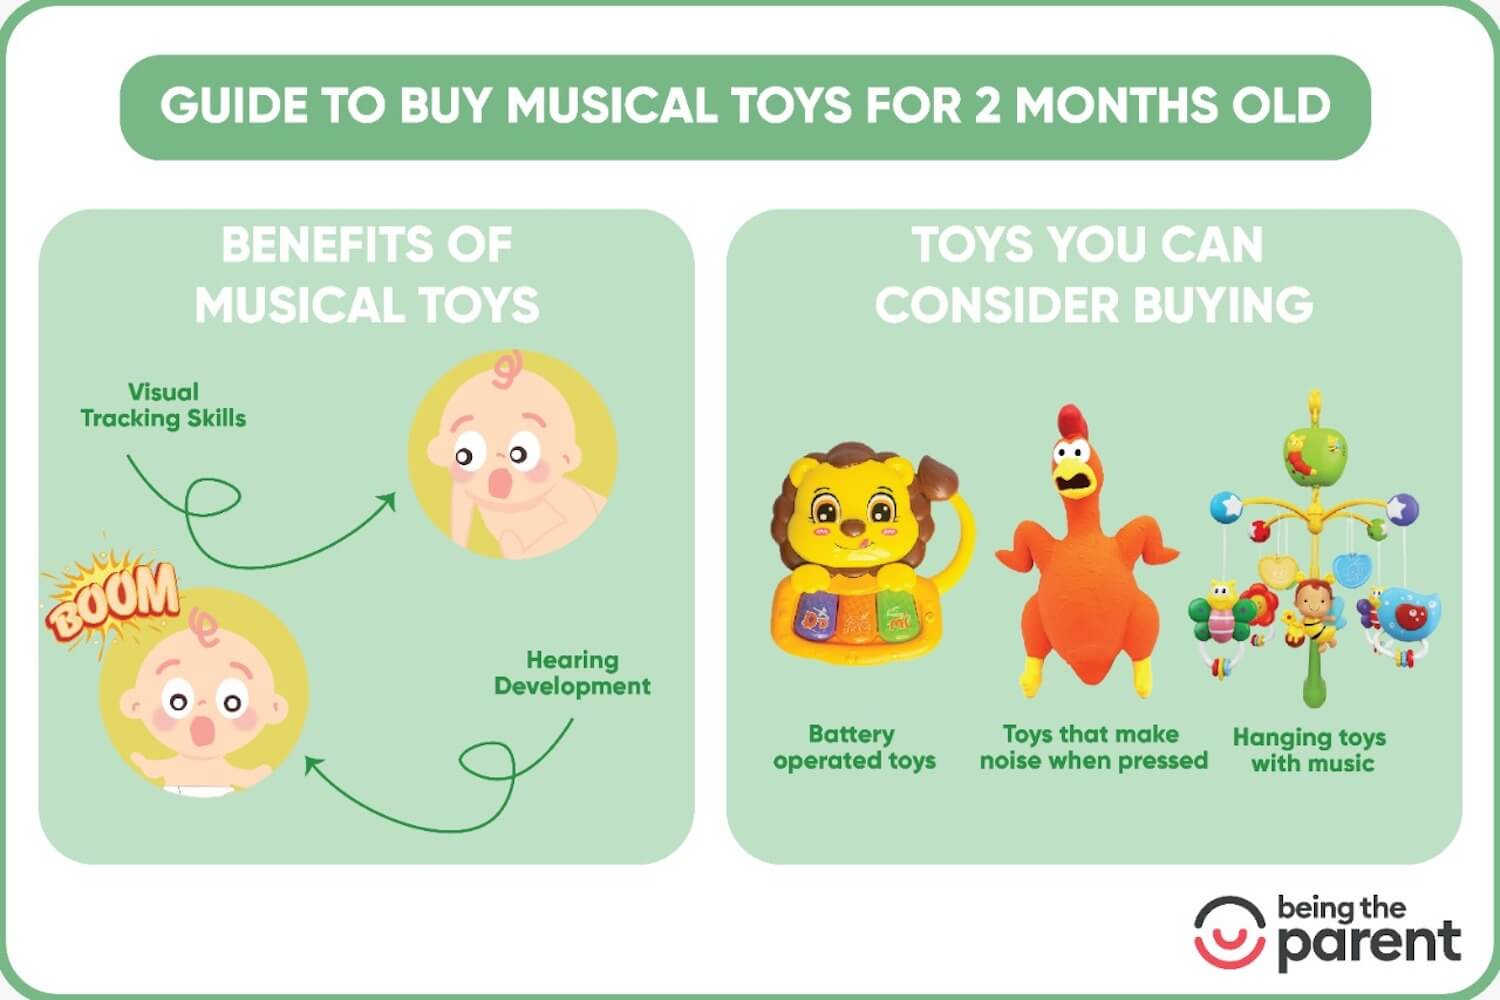 Musical toys for 2 month